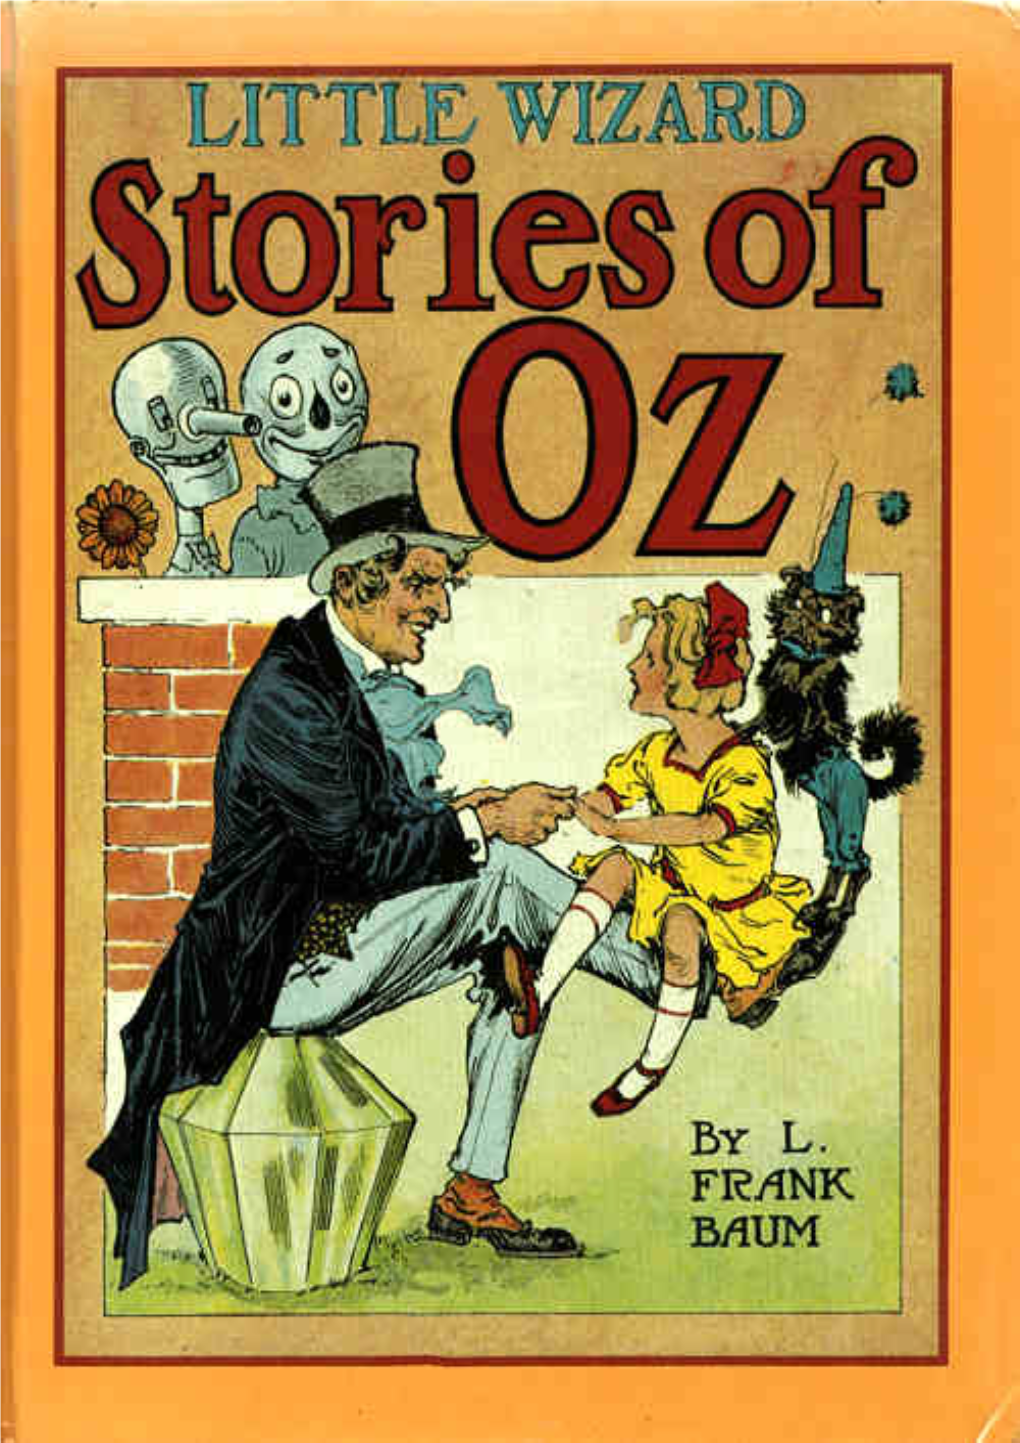 Little Wizard Stories of Oz, by L